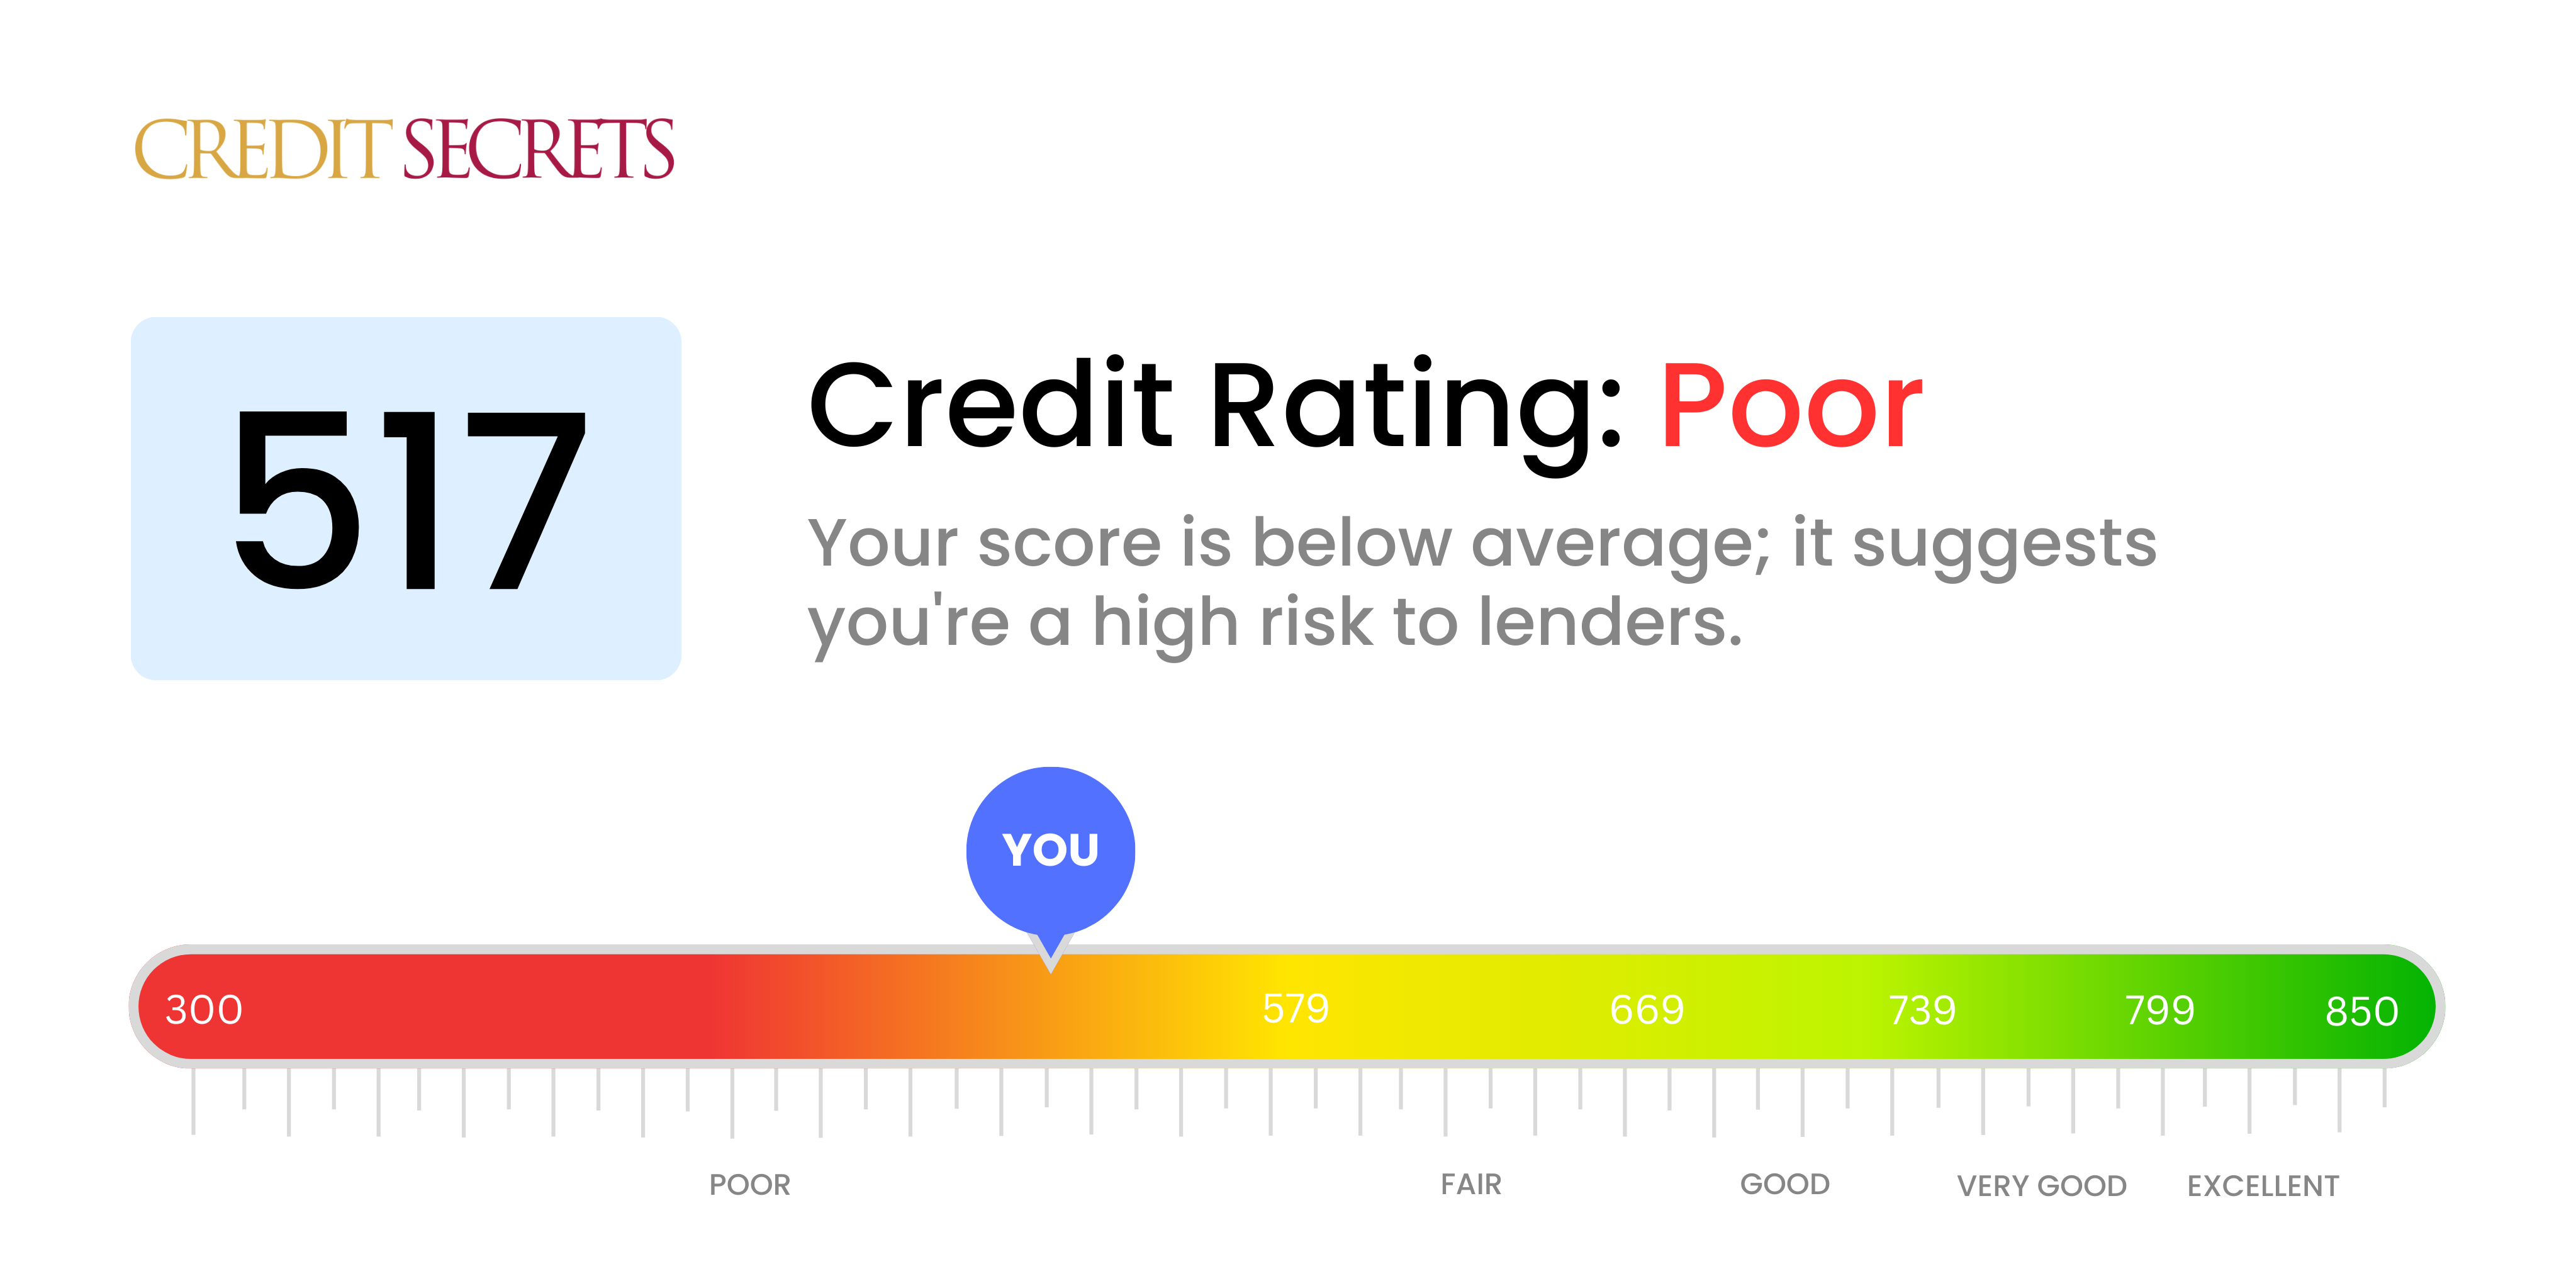 Is 517 a good credit score?